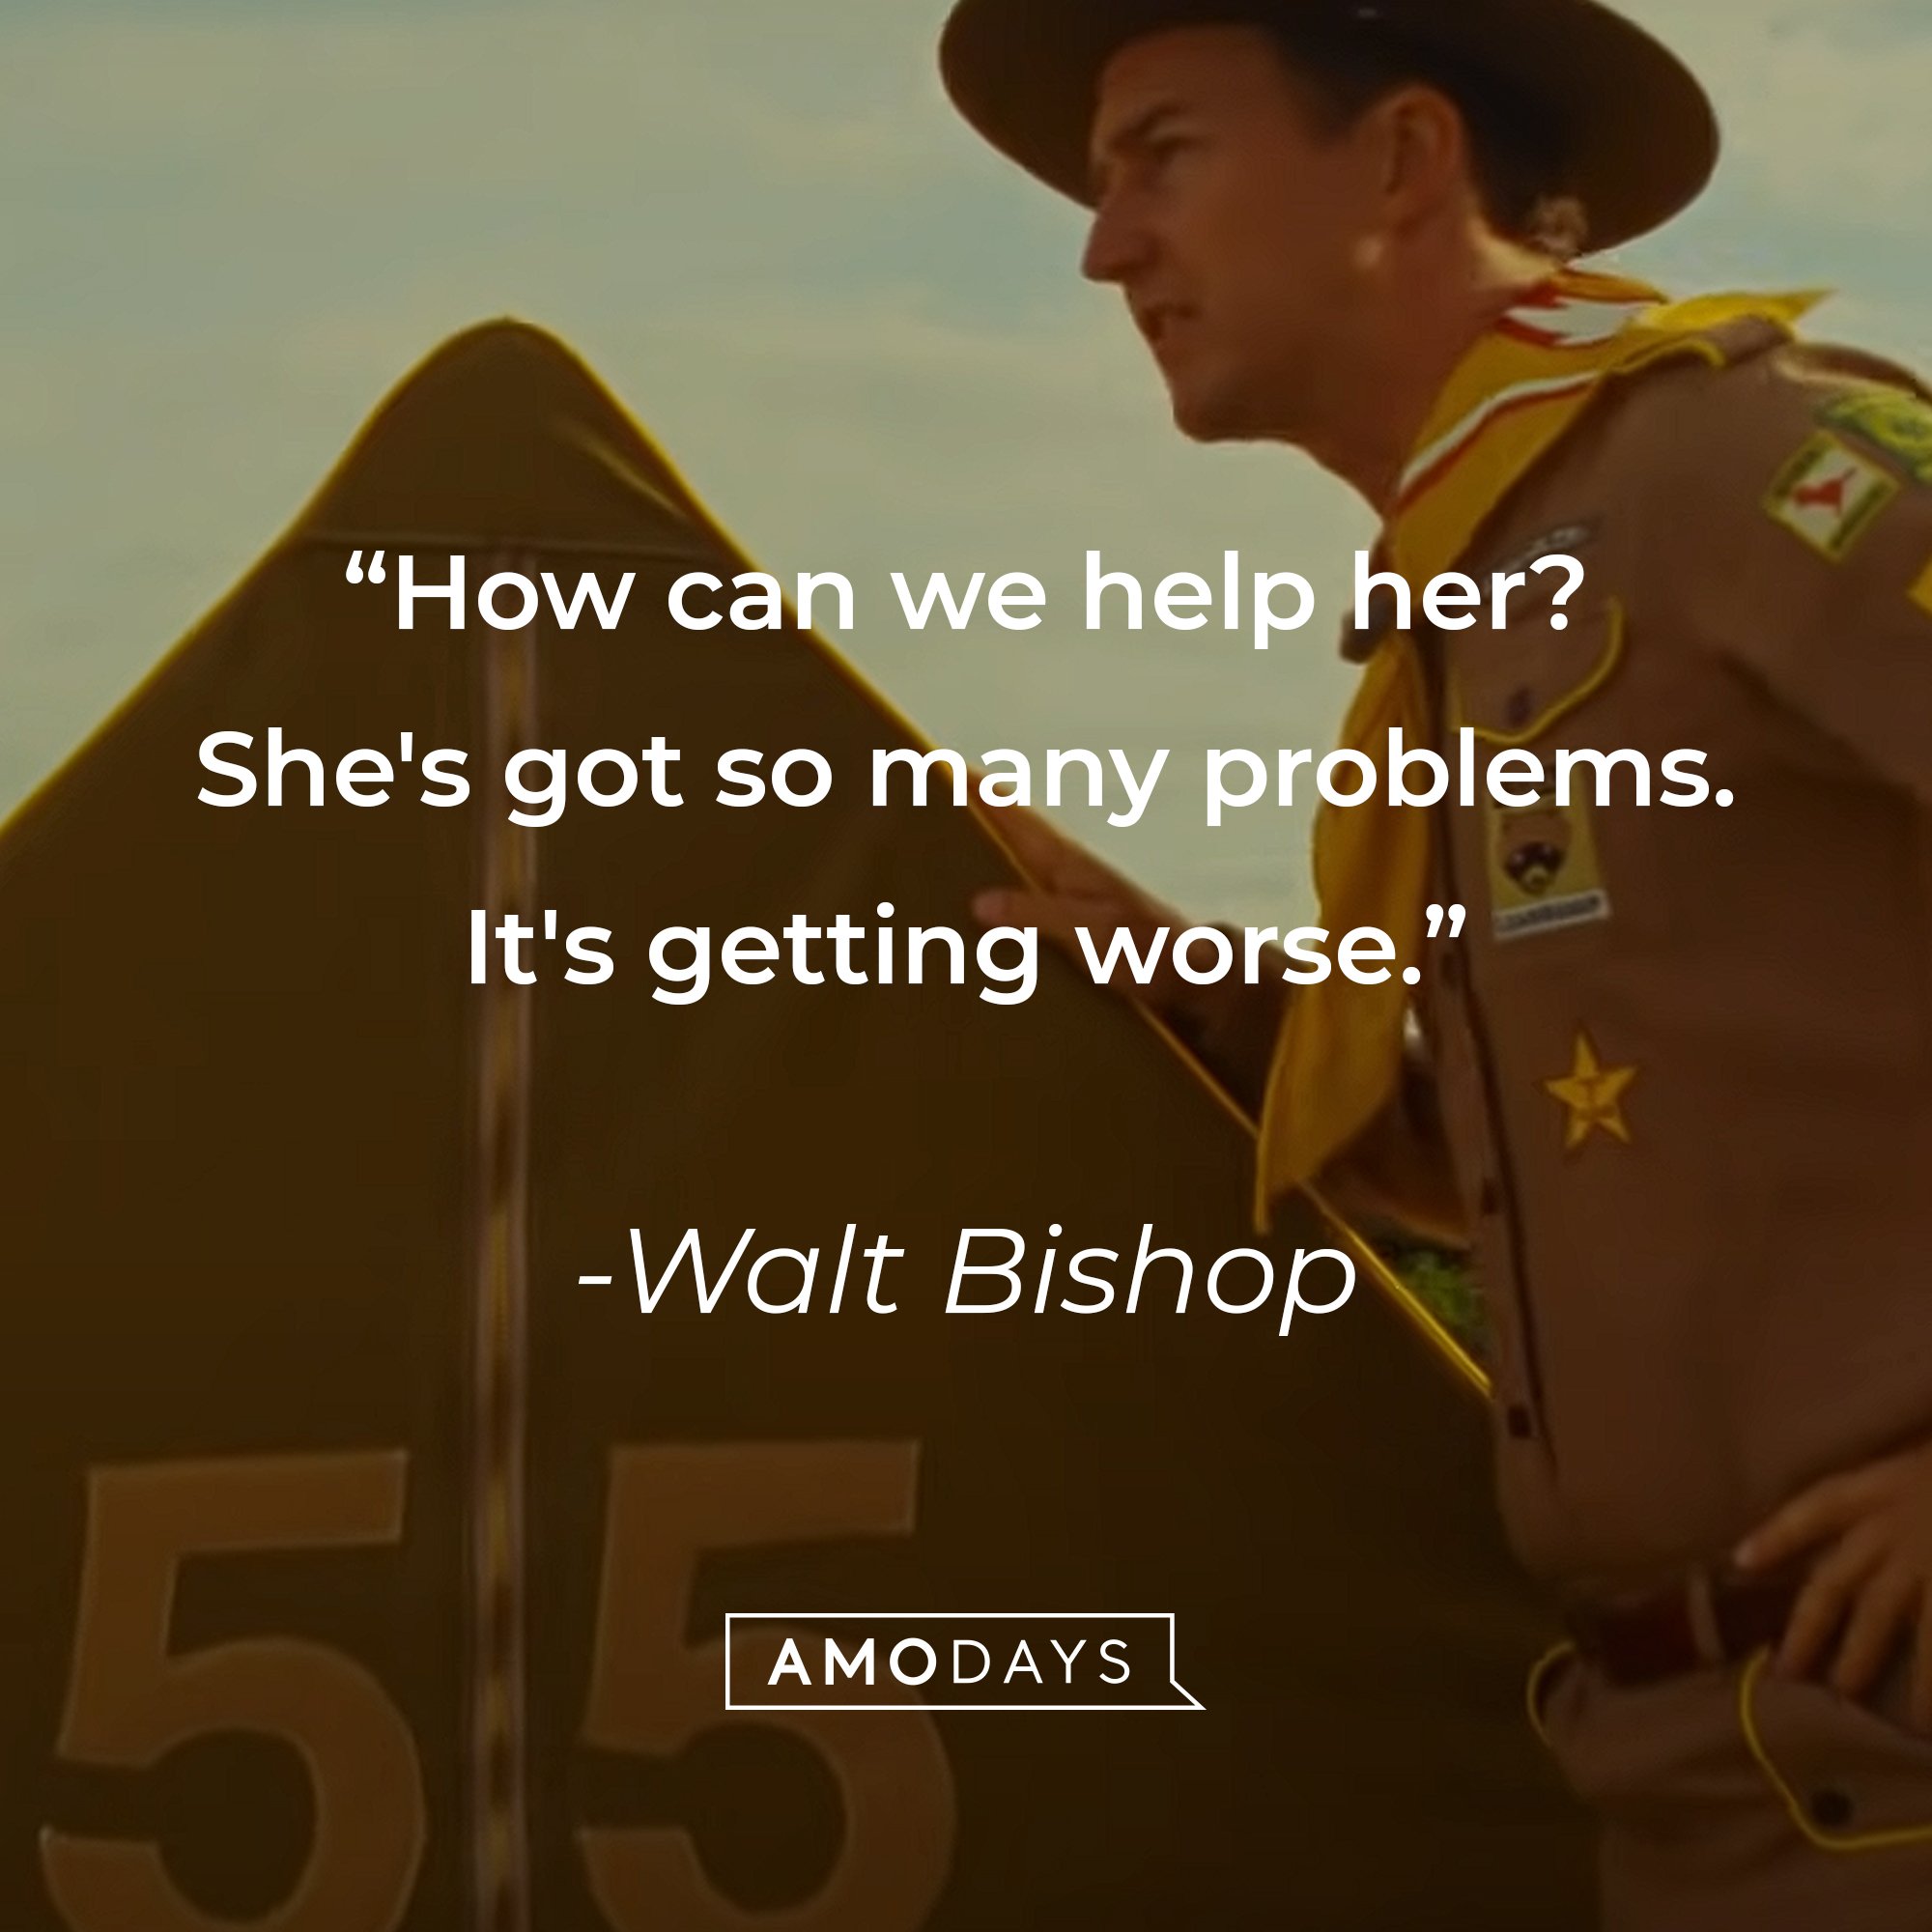 Walt Bishop's quote: "How can we help her? She's got so many problems. It's getting worse." | Image: AmoDays